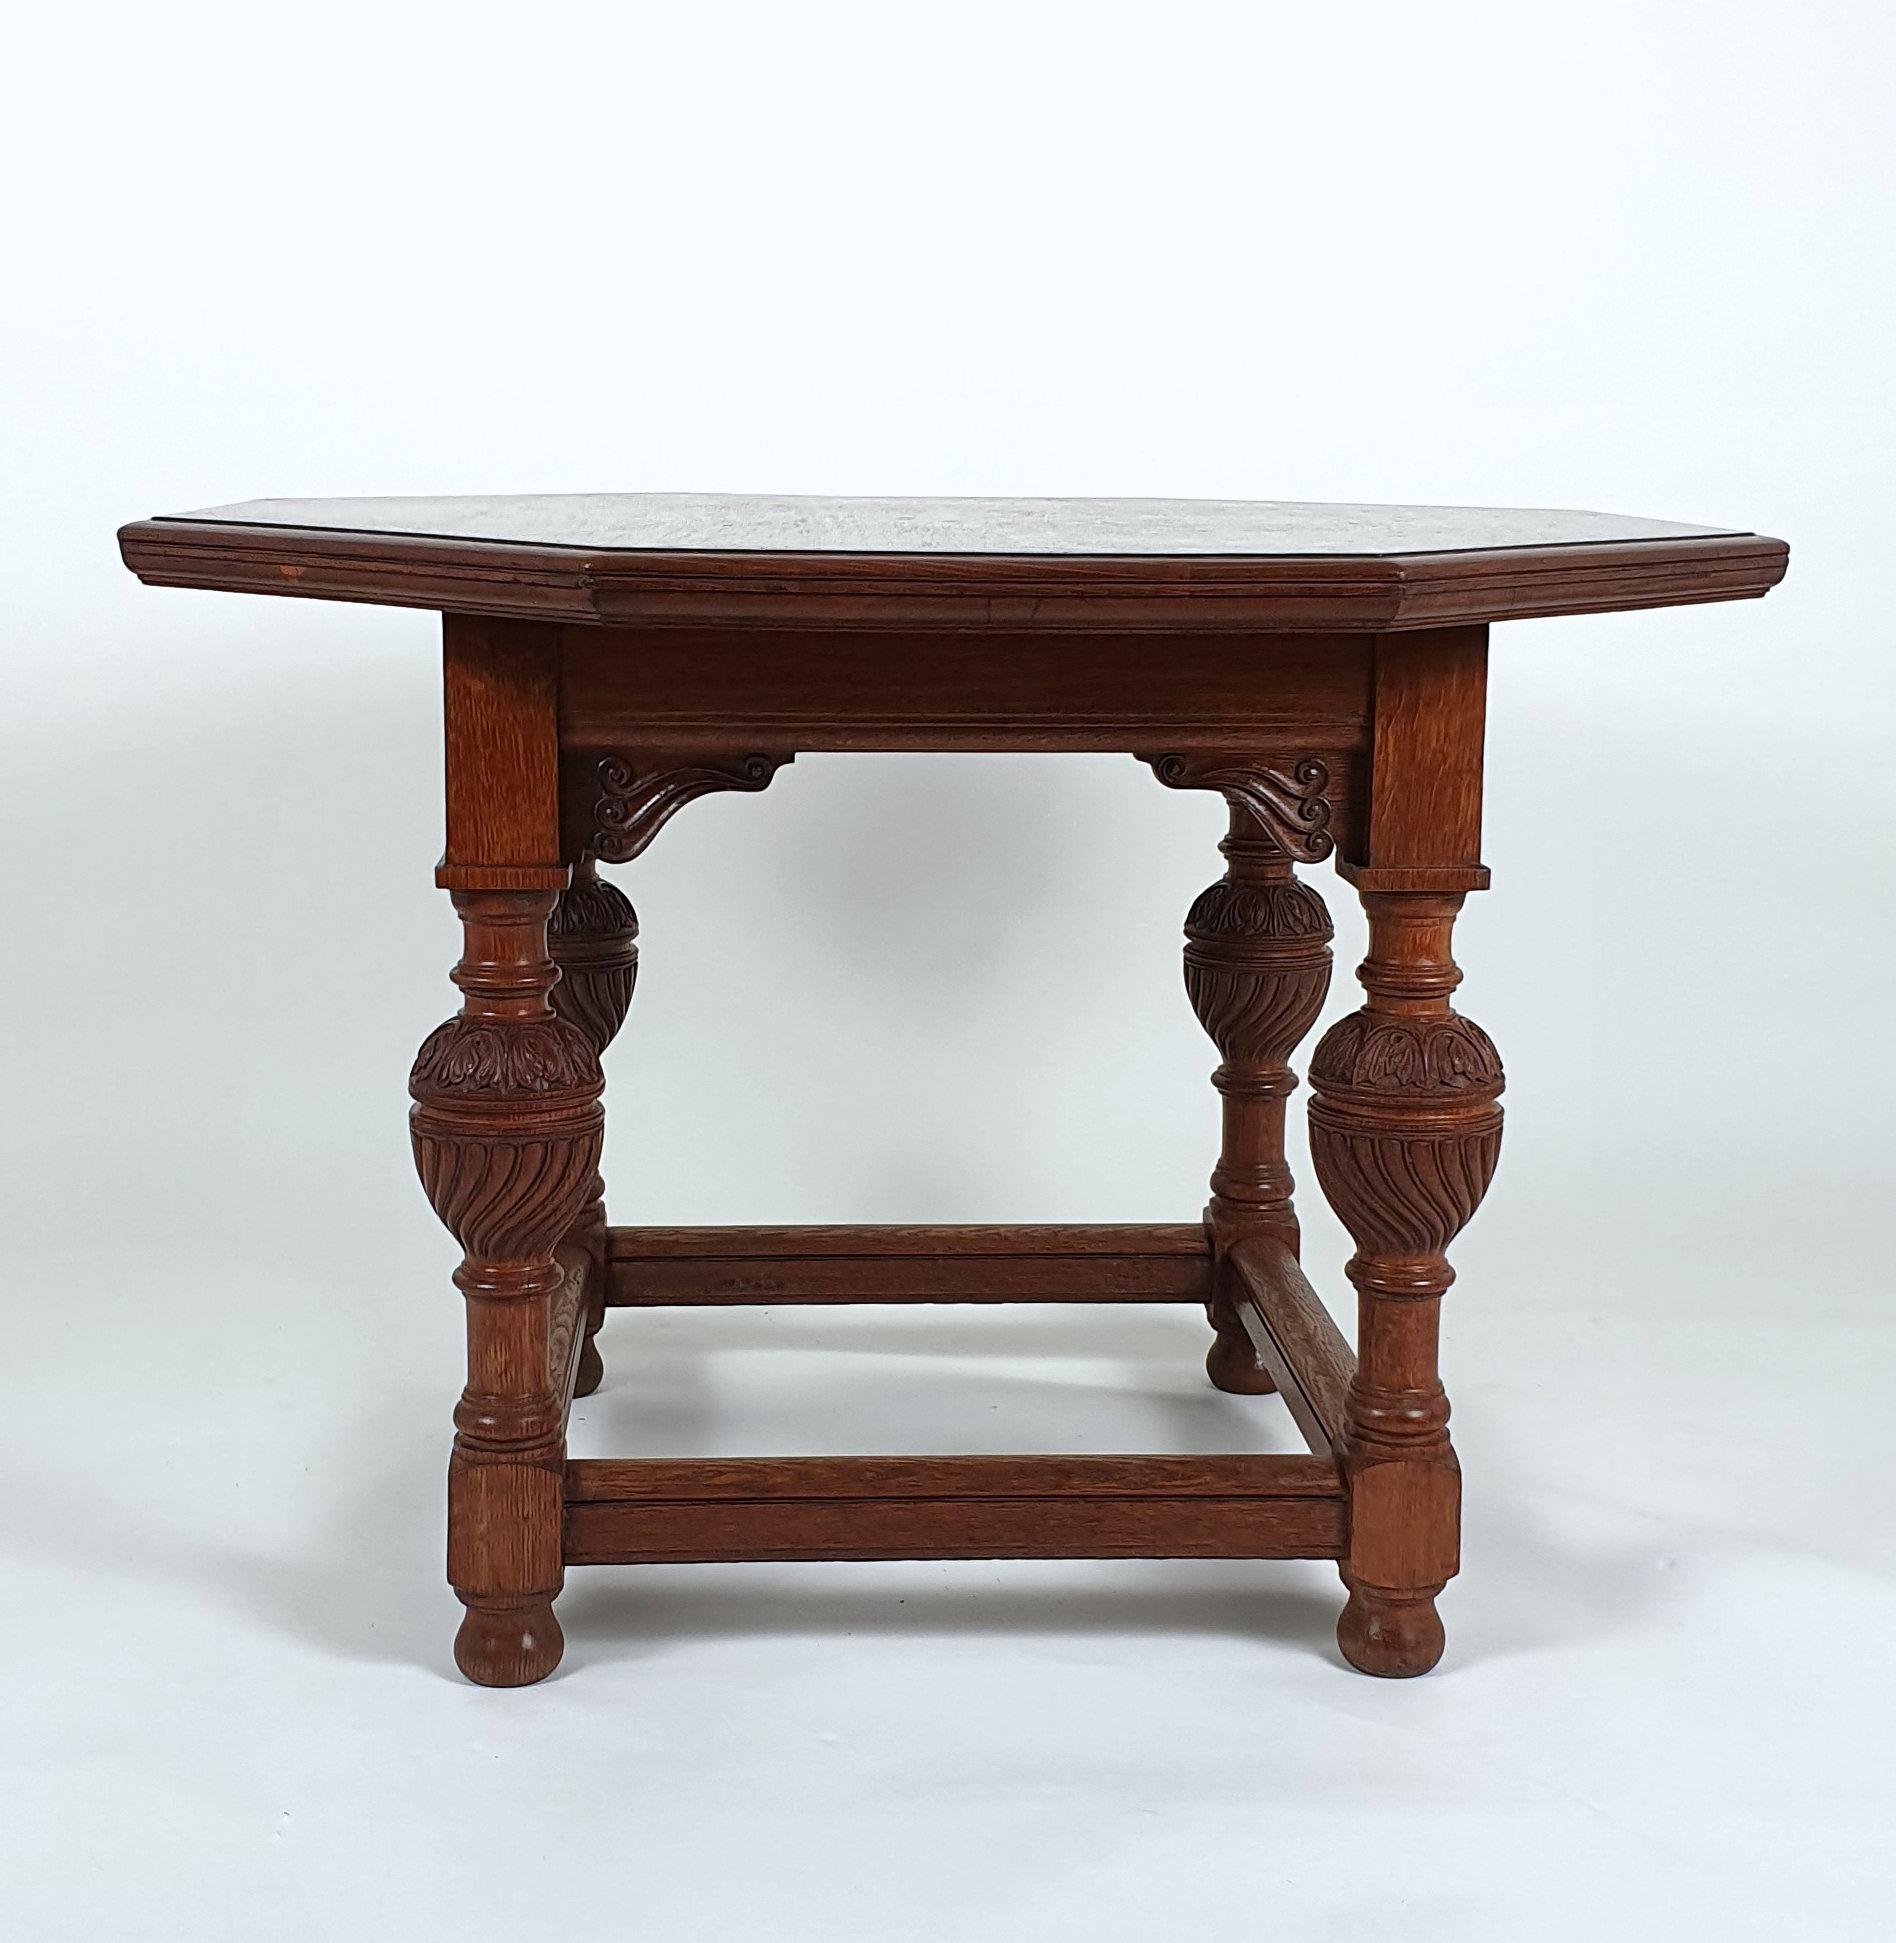 This very attractive and beautifully carved, 19th century. centre table features an octagonal shaped top with wrythen detailed supports on a square framed under tier. The table measures 41 ½ in, 105.4 cm in diameter and 28 ¾ in, 73 cm in height.